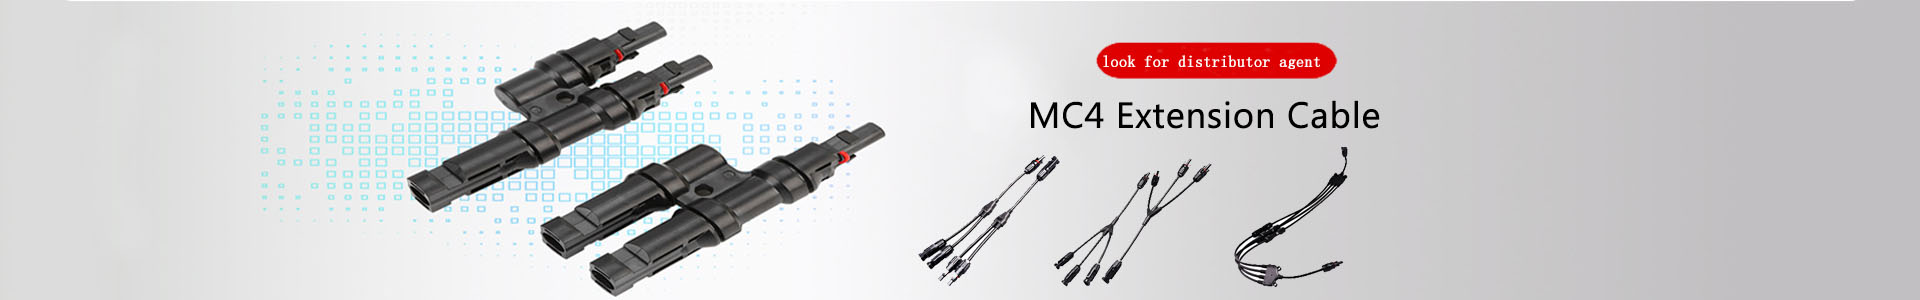 Feedback | Handwe Group-Solar | solar connector,solar branch connector,diode fuse connector,MC4 extnsion cable,H1Z2Z2 solar cable, UL4703 solar cable | Leading manufacturer and supplier of solar pv cables and connectors